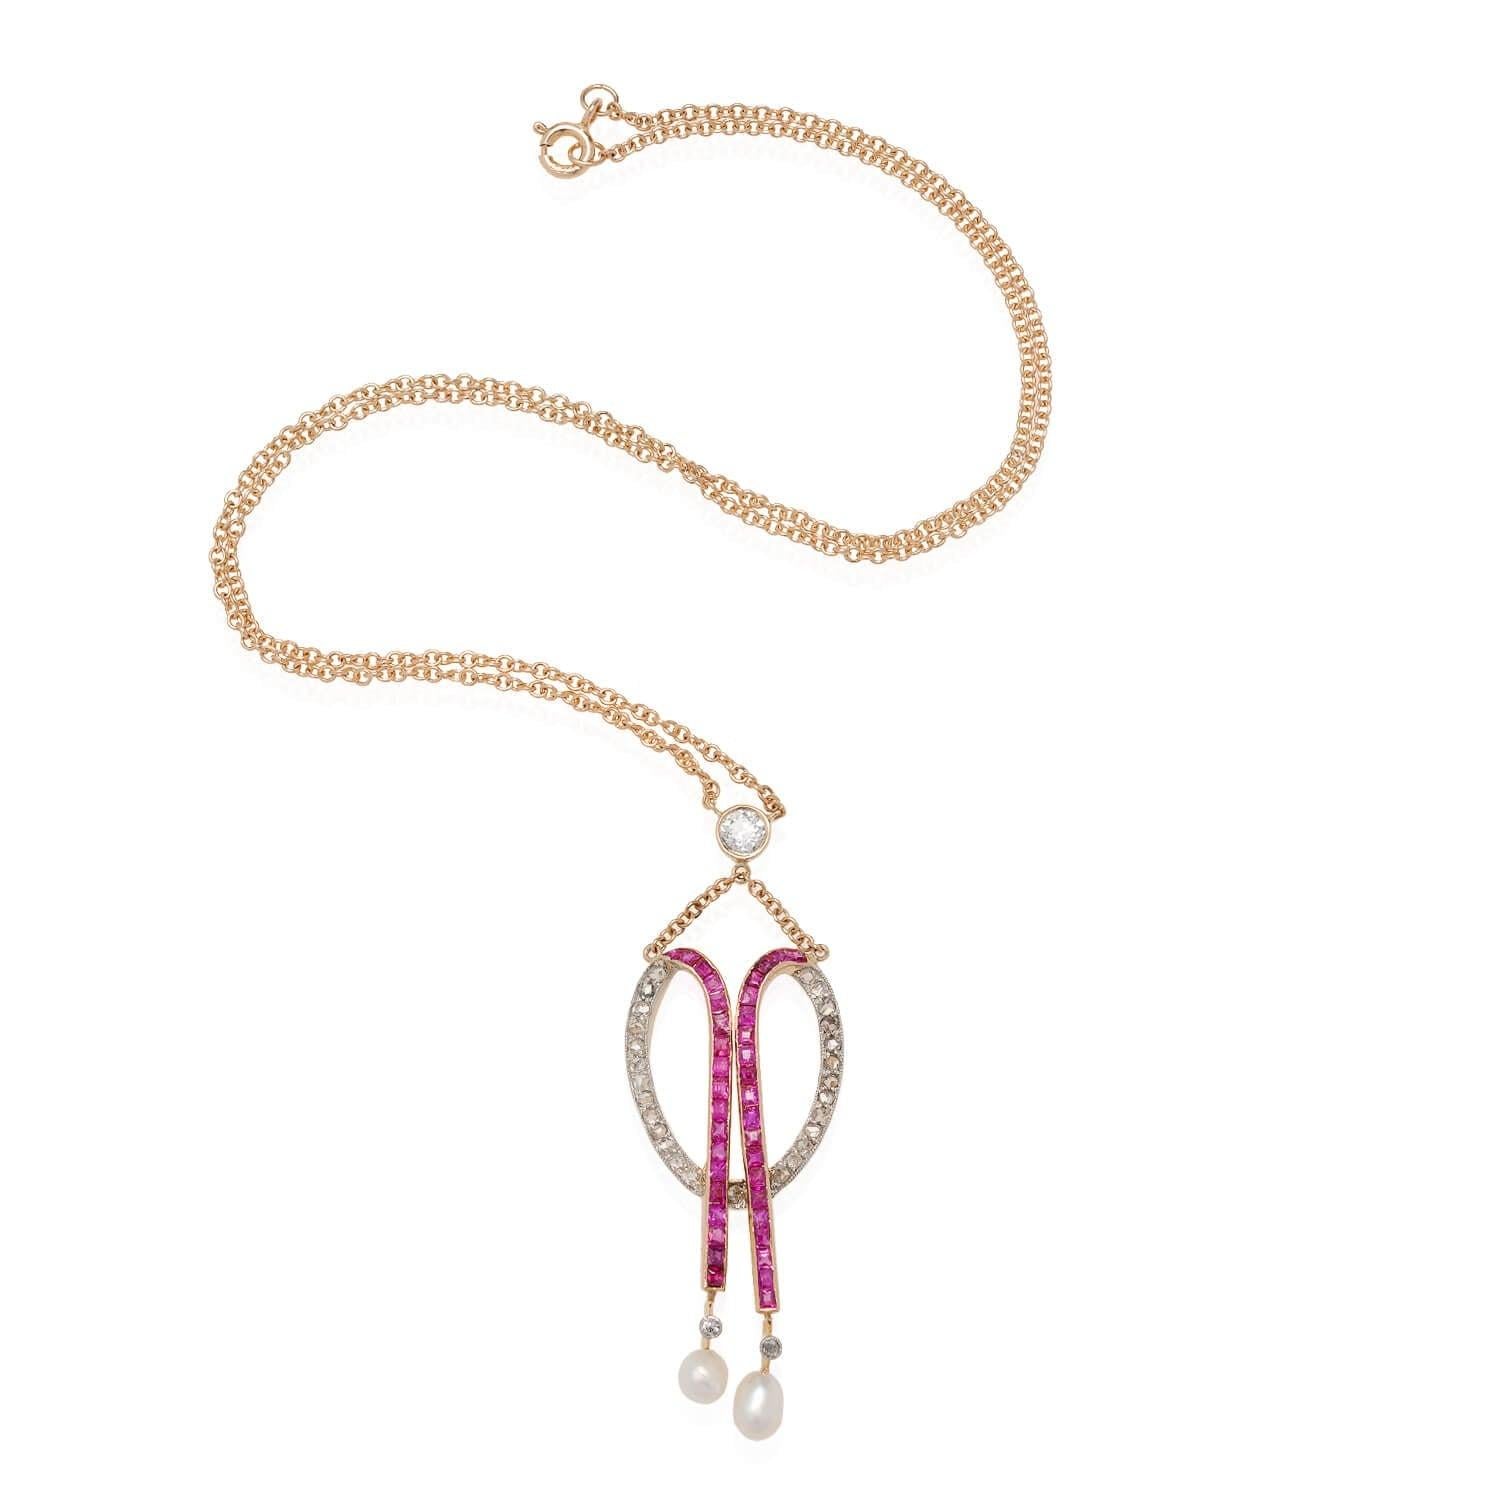 A gorgeous pendant necklace from the Edwardian (ca1910s) era! Crafted in 18kt yellow gold and topped in platinum, this unique pendant has an elegant design of glittering Single Cut diamonds and Square Cut calibrated rubies. The bead-set diamonds,